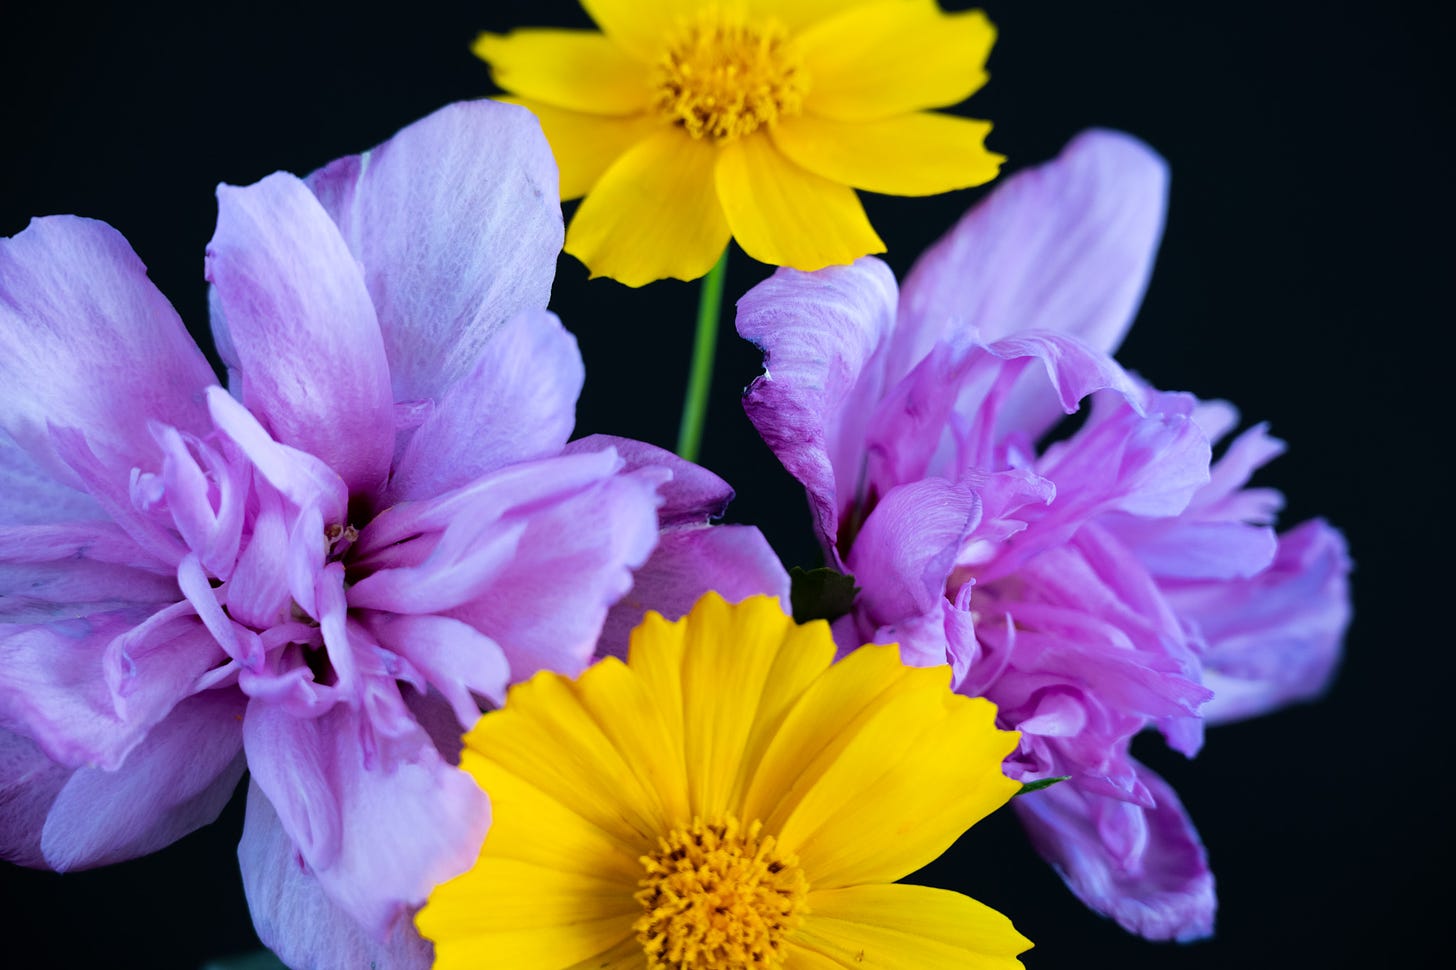 Two yellow coriopsis flowers with lavendar althea (Rose of Sharon) on either side with a black background